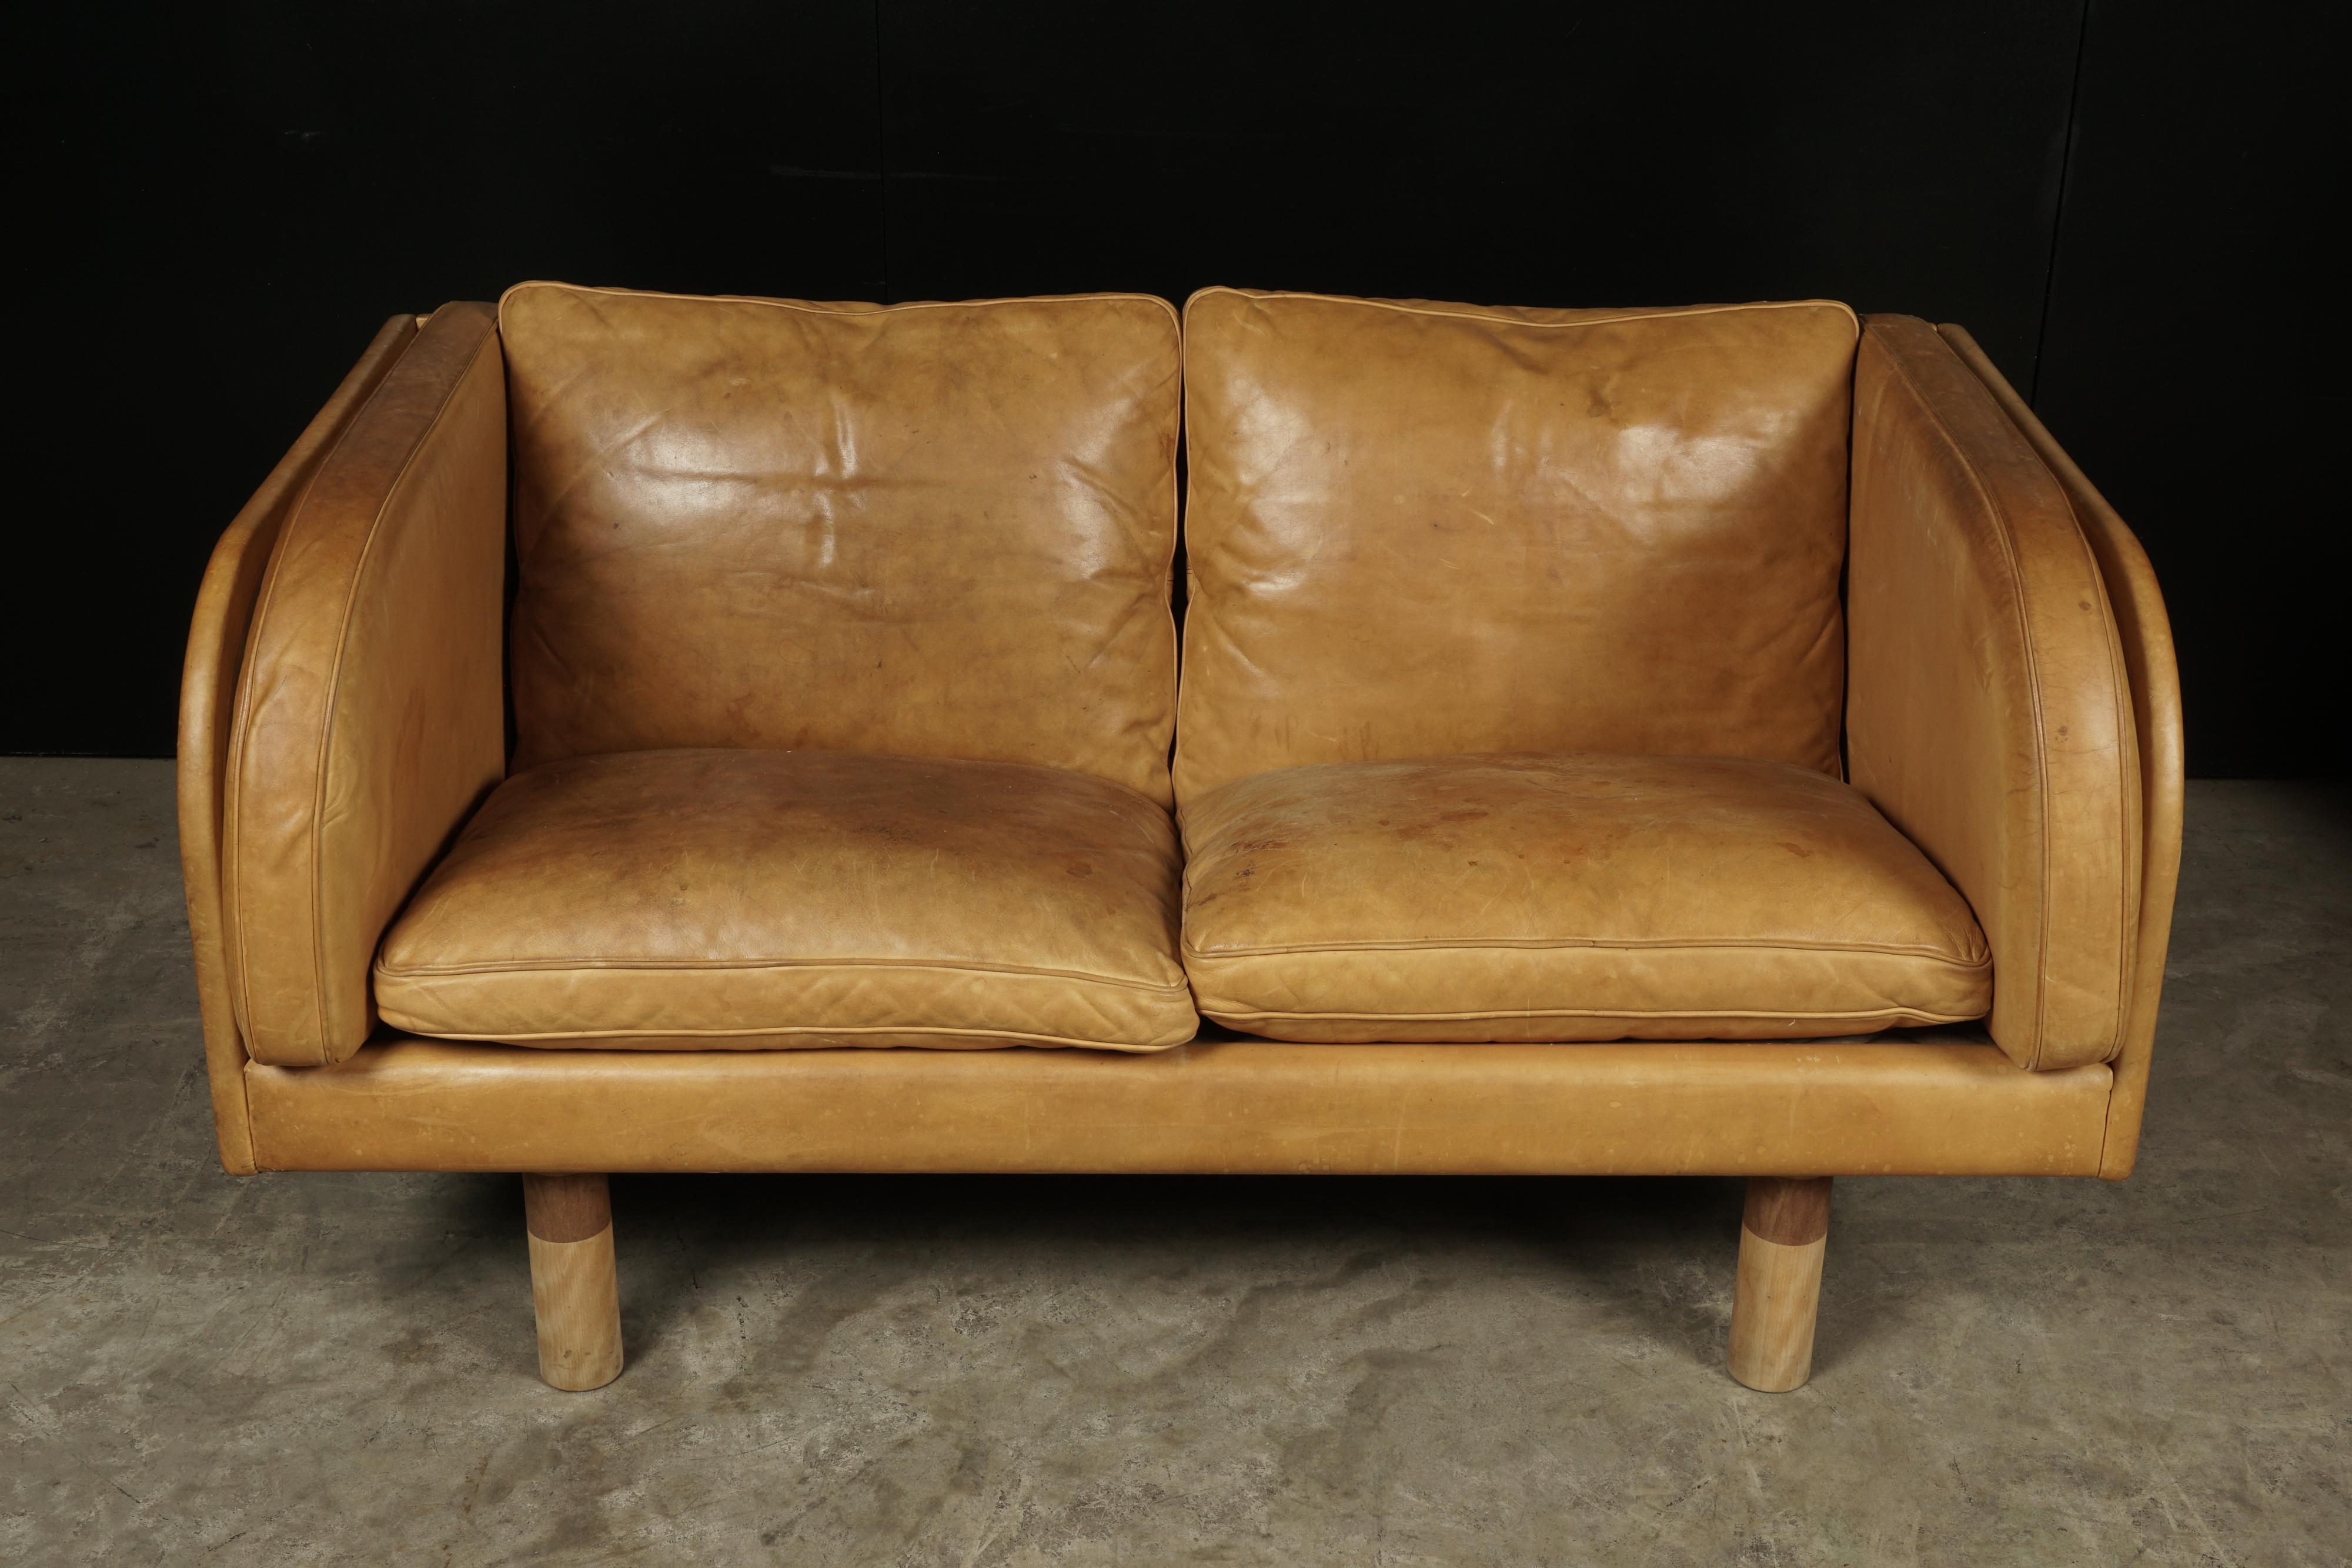 Rare Pair of Two-Seat Sofas in Cognac Leather Designed by Jørgen Gammelgaard 1